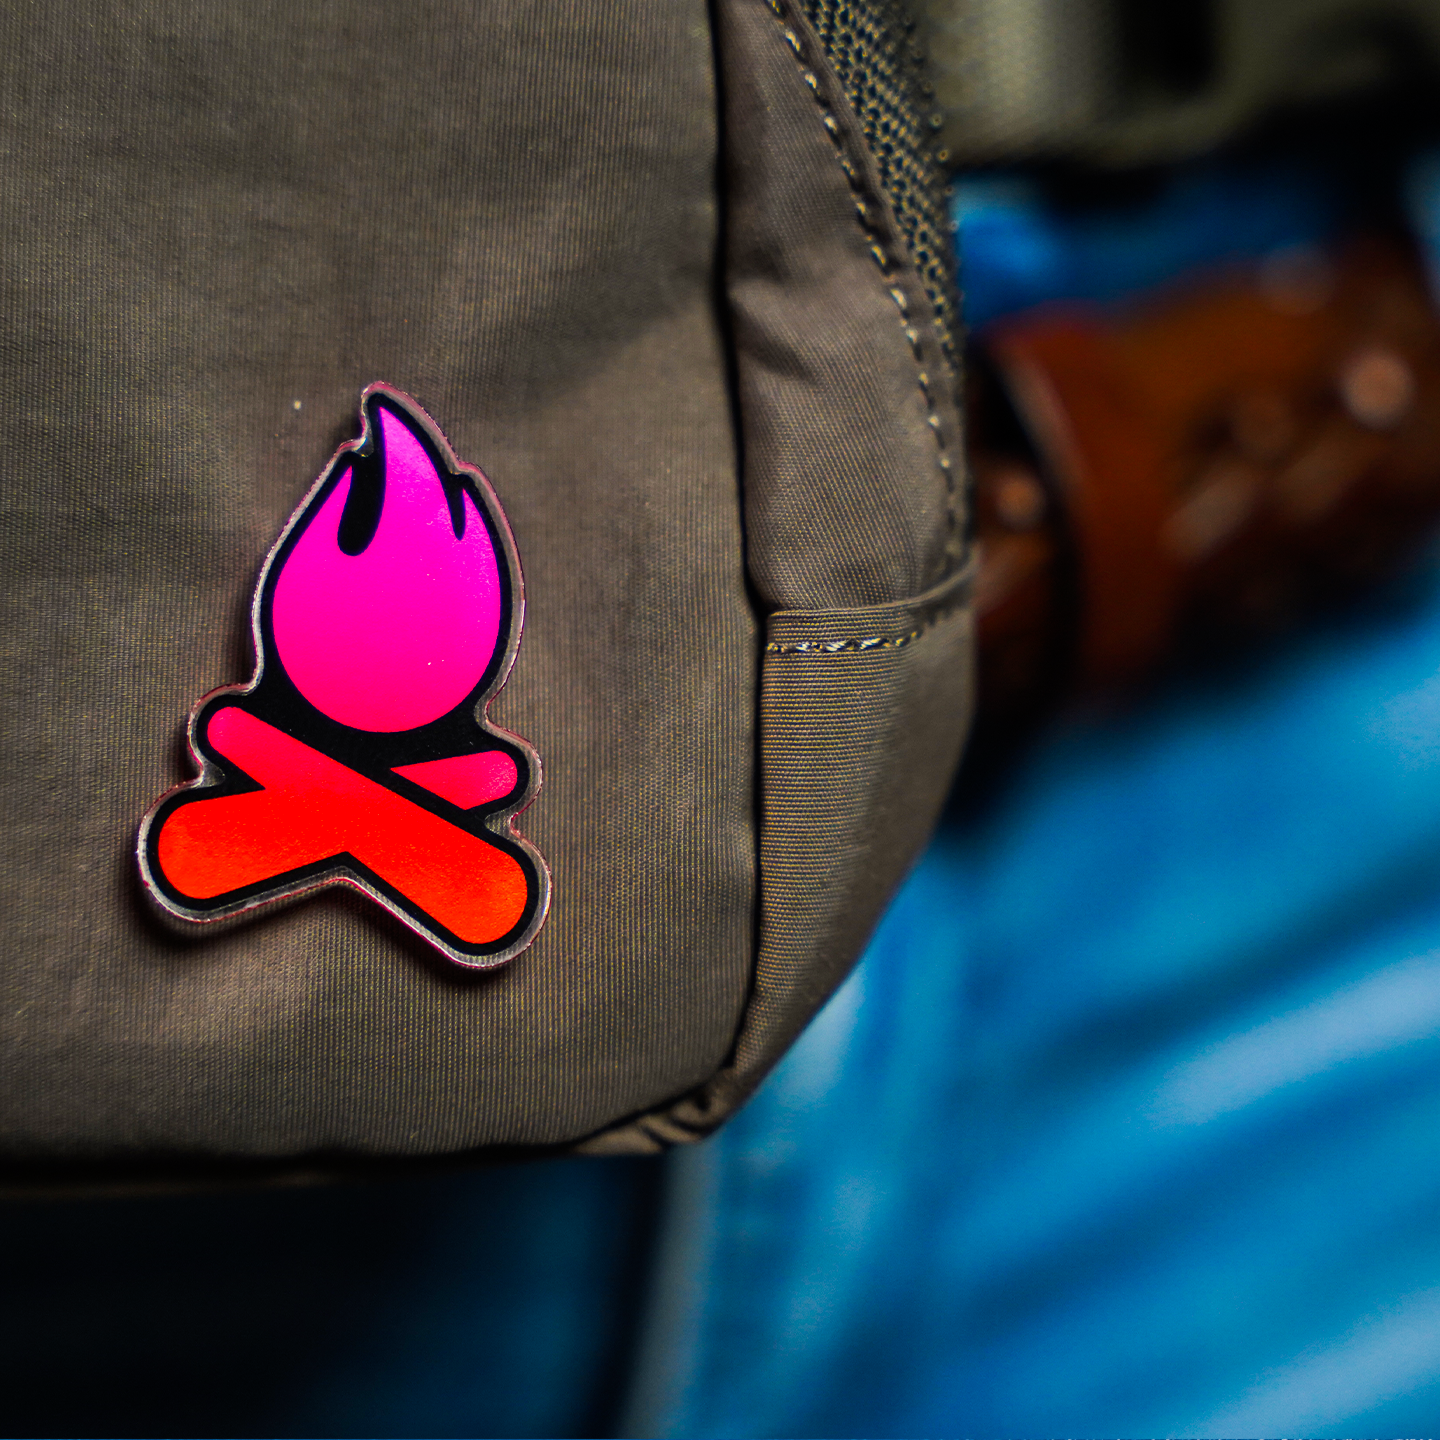 🎉 NEW: 🔥 MyTRIBE (COLLECTOR'S PIN) 🏆